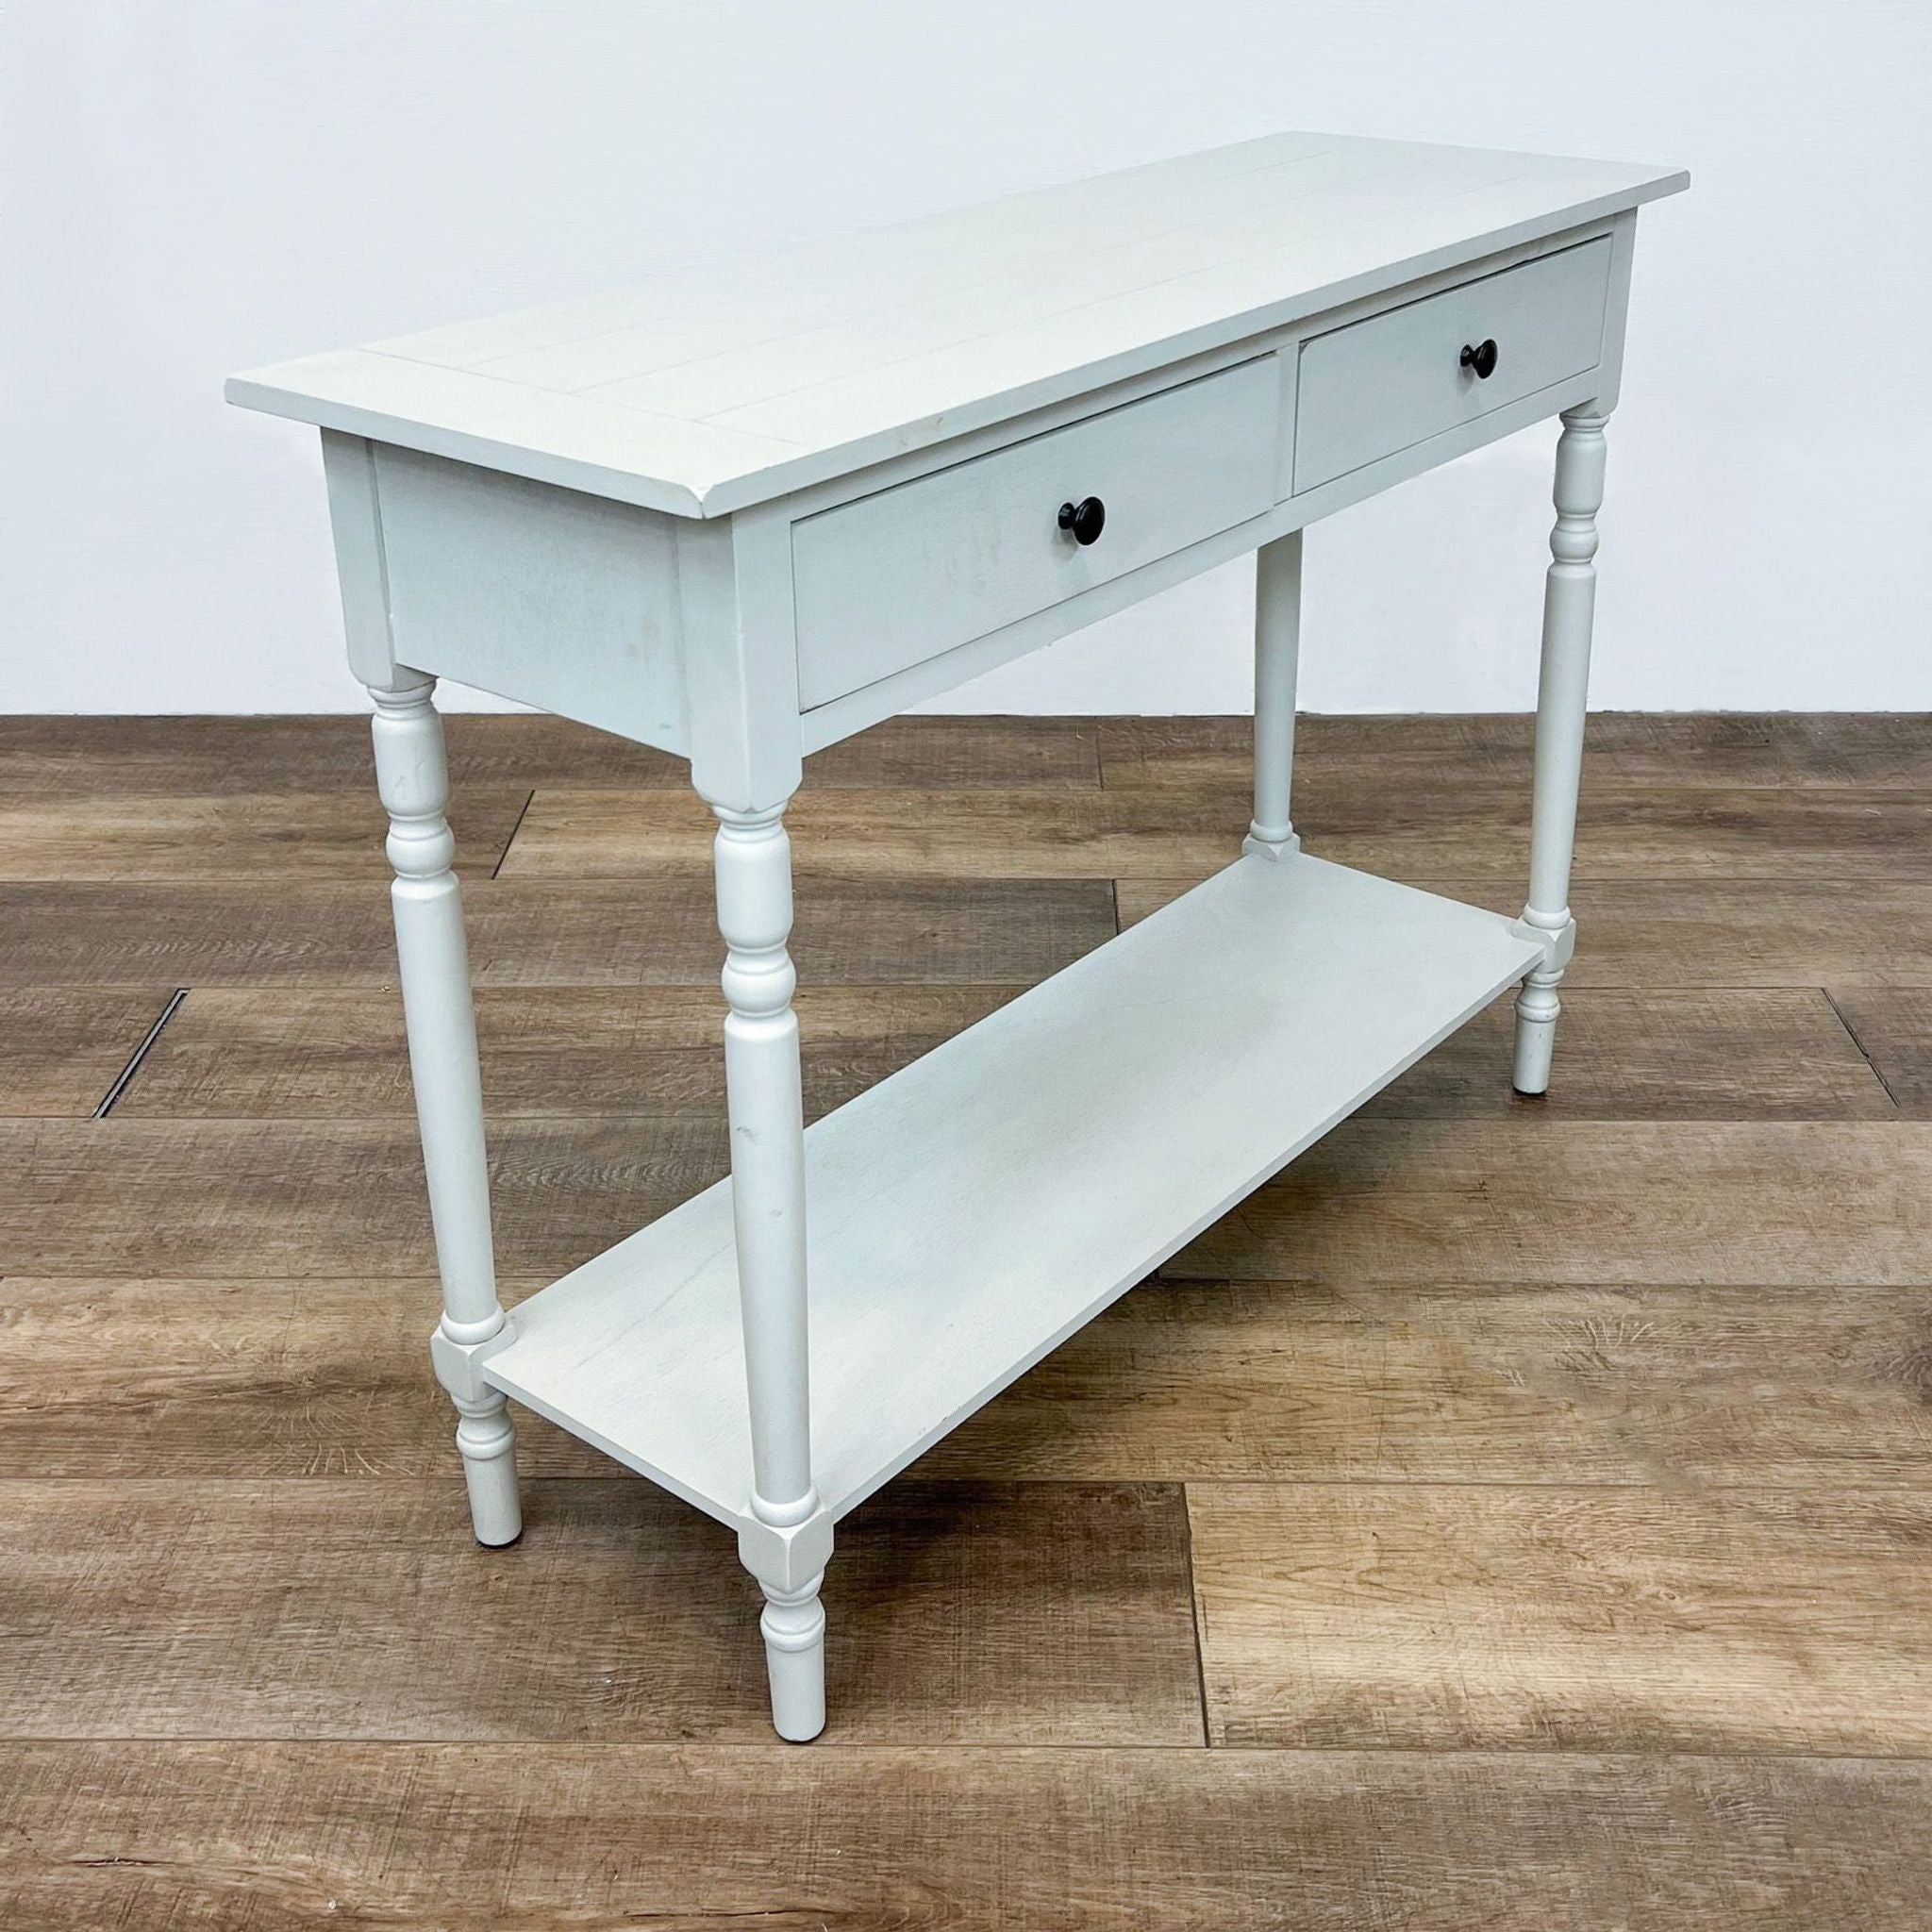 White Reperch wooden console table with two drawers and lower shelf on a wooden floor.